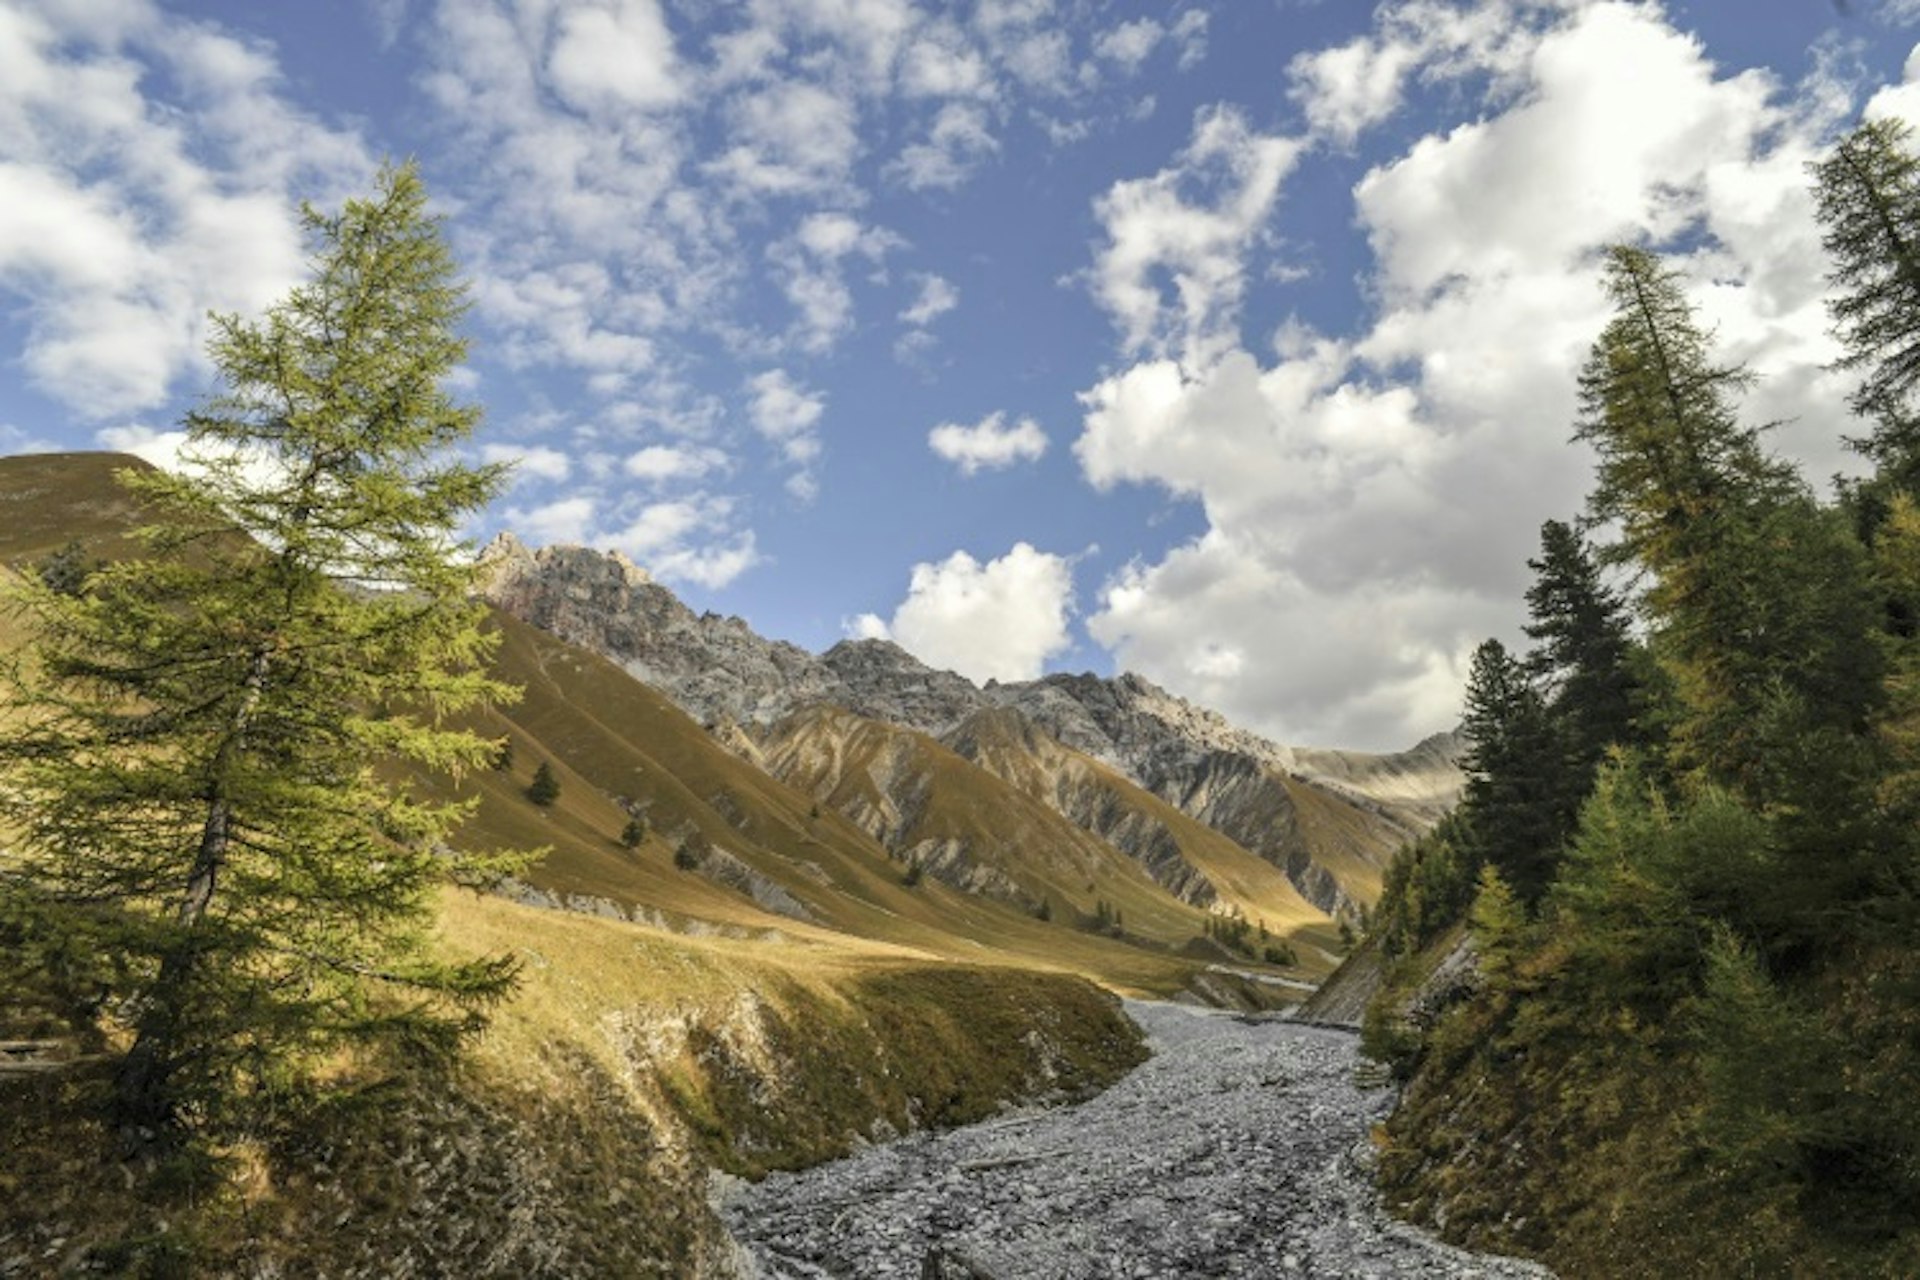 The sun shines down on Val Trupchun. Image courtesy of the Swiss National Park.